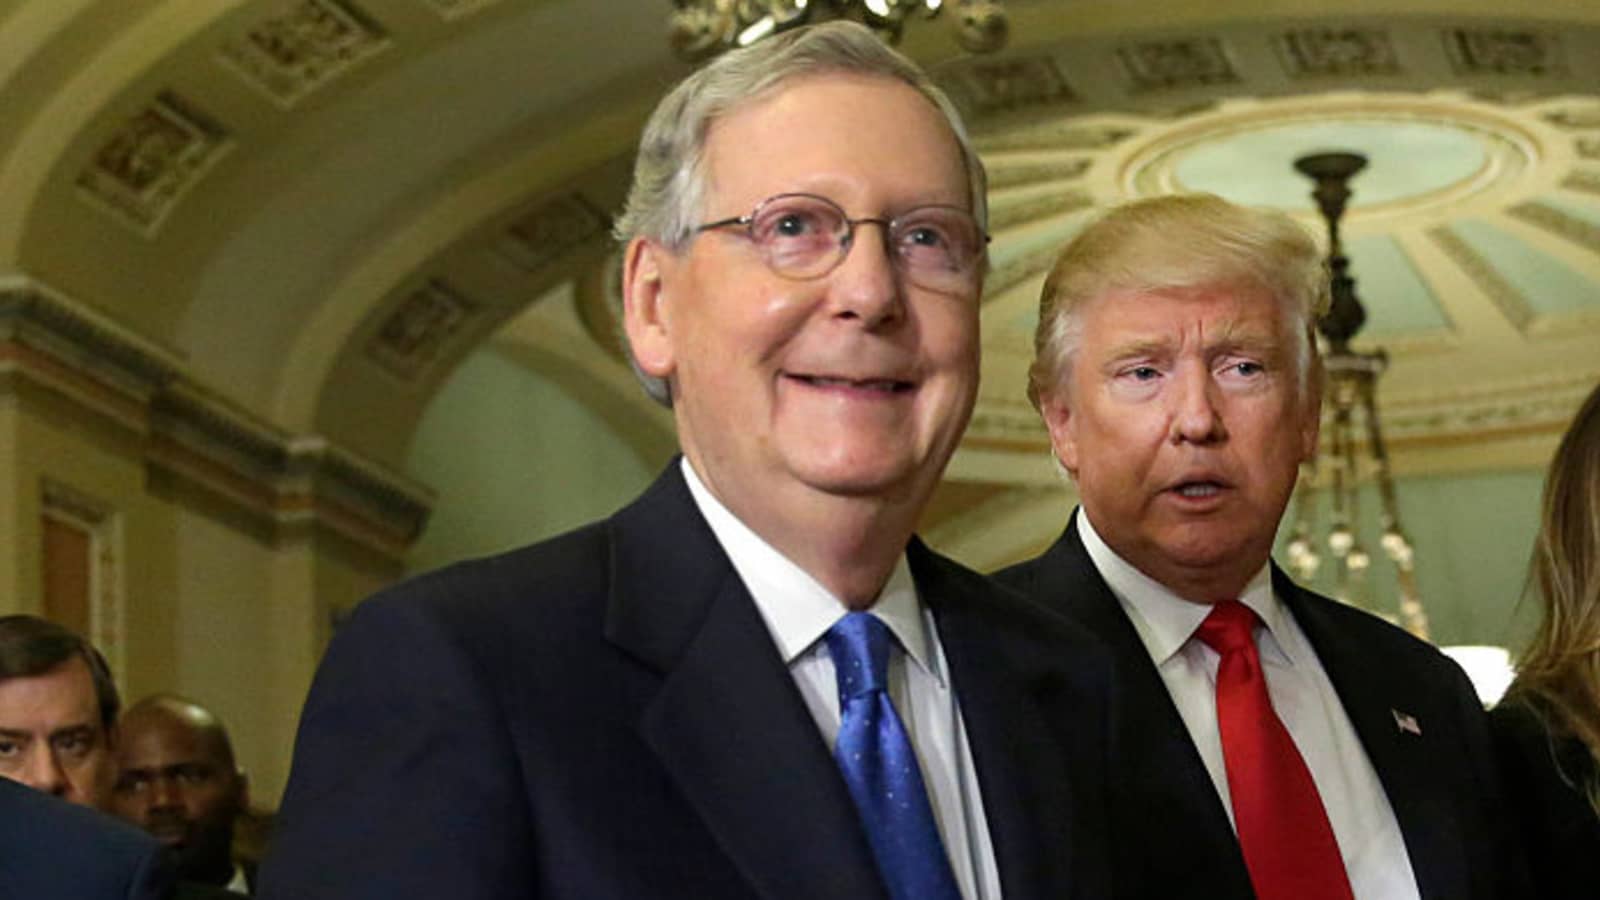 Trump will need Mitch McConnell as Pelosi and Democrats control House